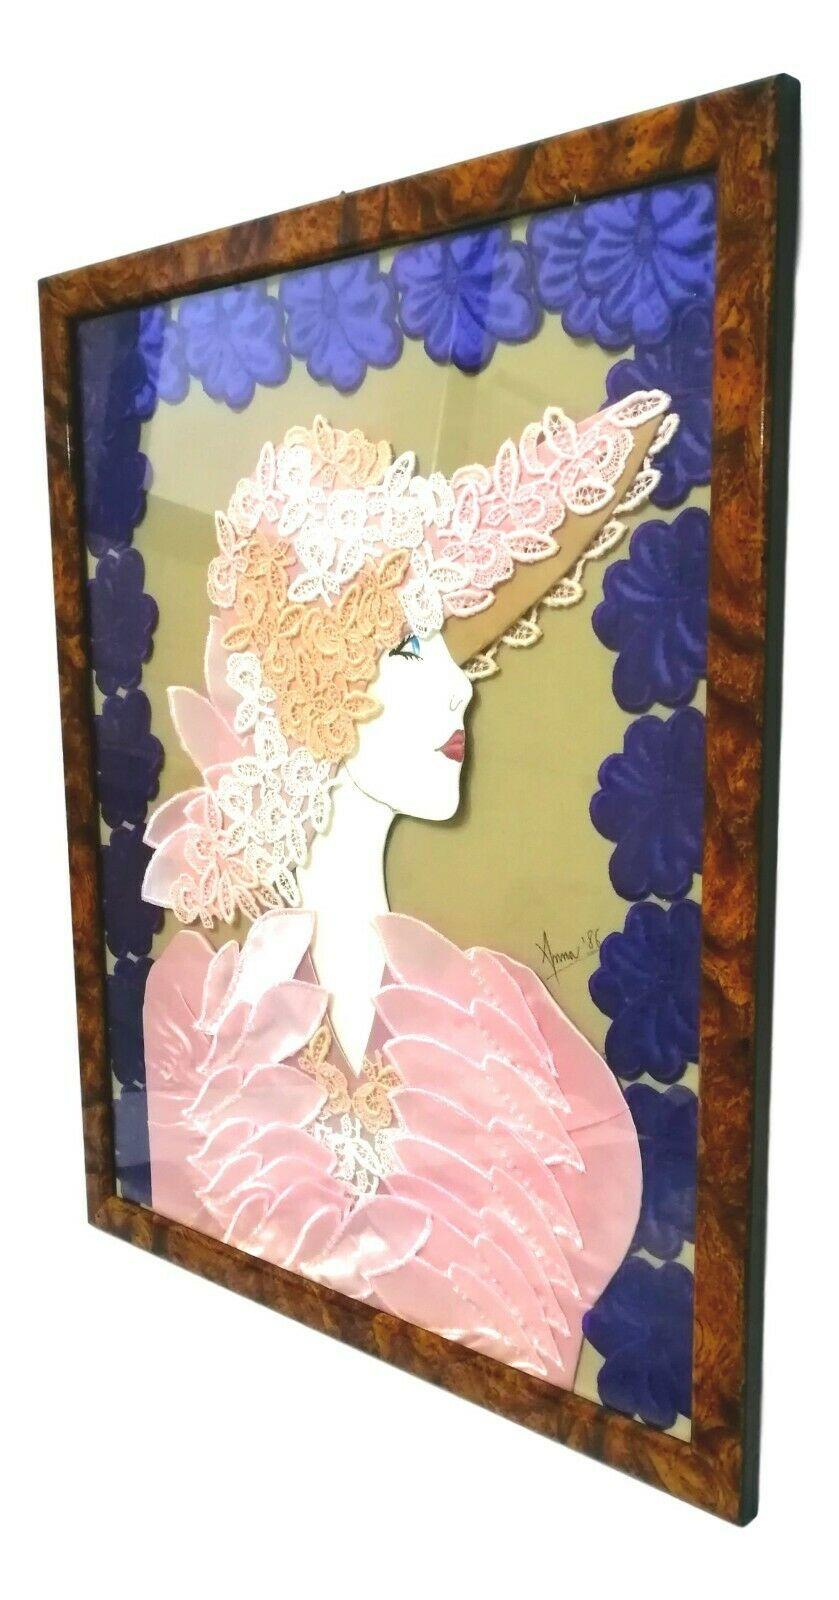 Italian Collage Picture in Satin Lace and Applications with Woman Figure, 1980s For Sale